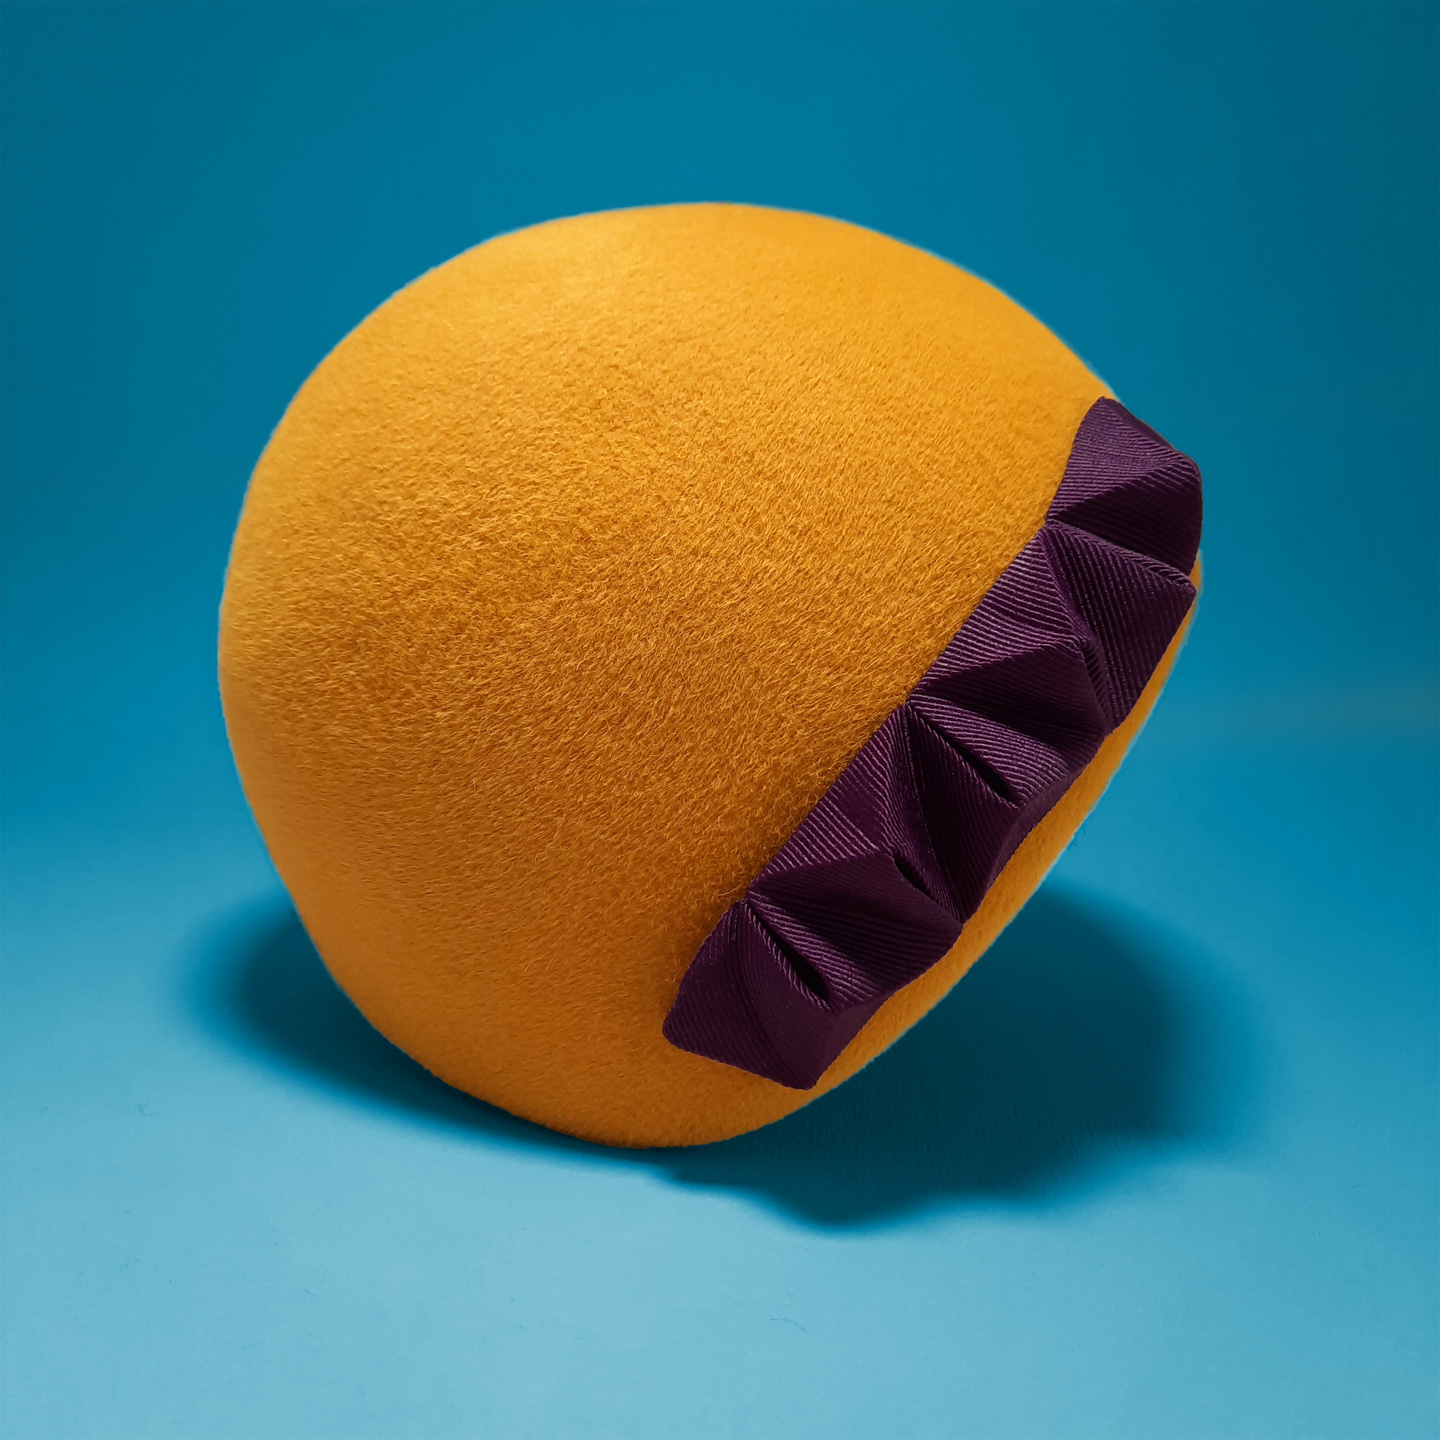 A yellow helmetlike fur felt hat with a purple 3D origami chameleon ornament which can be also worn as a bracelet.